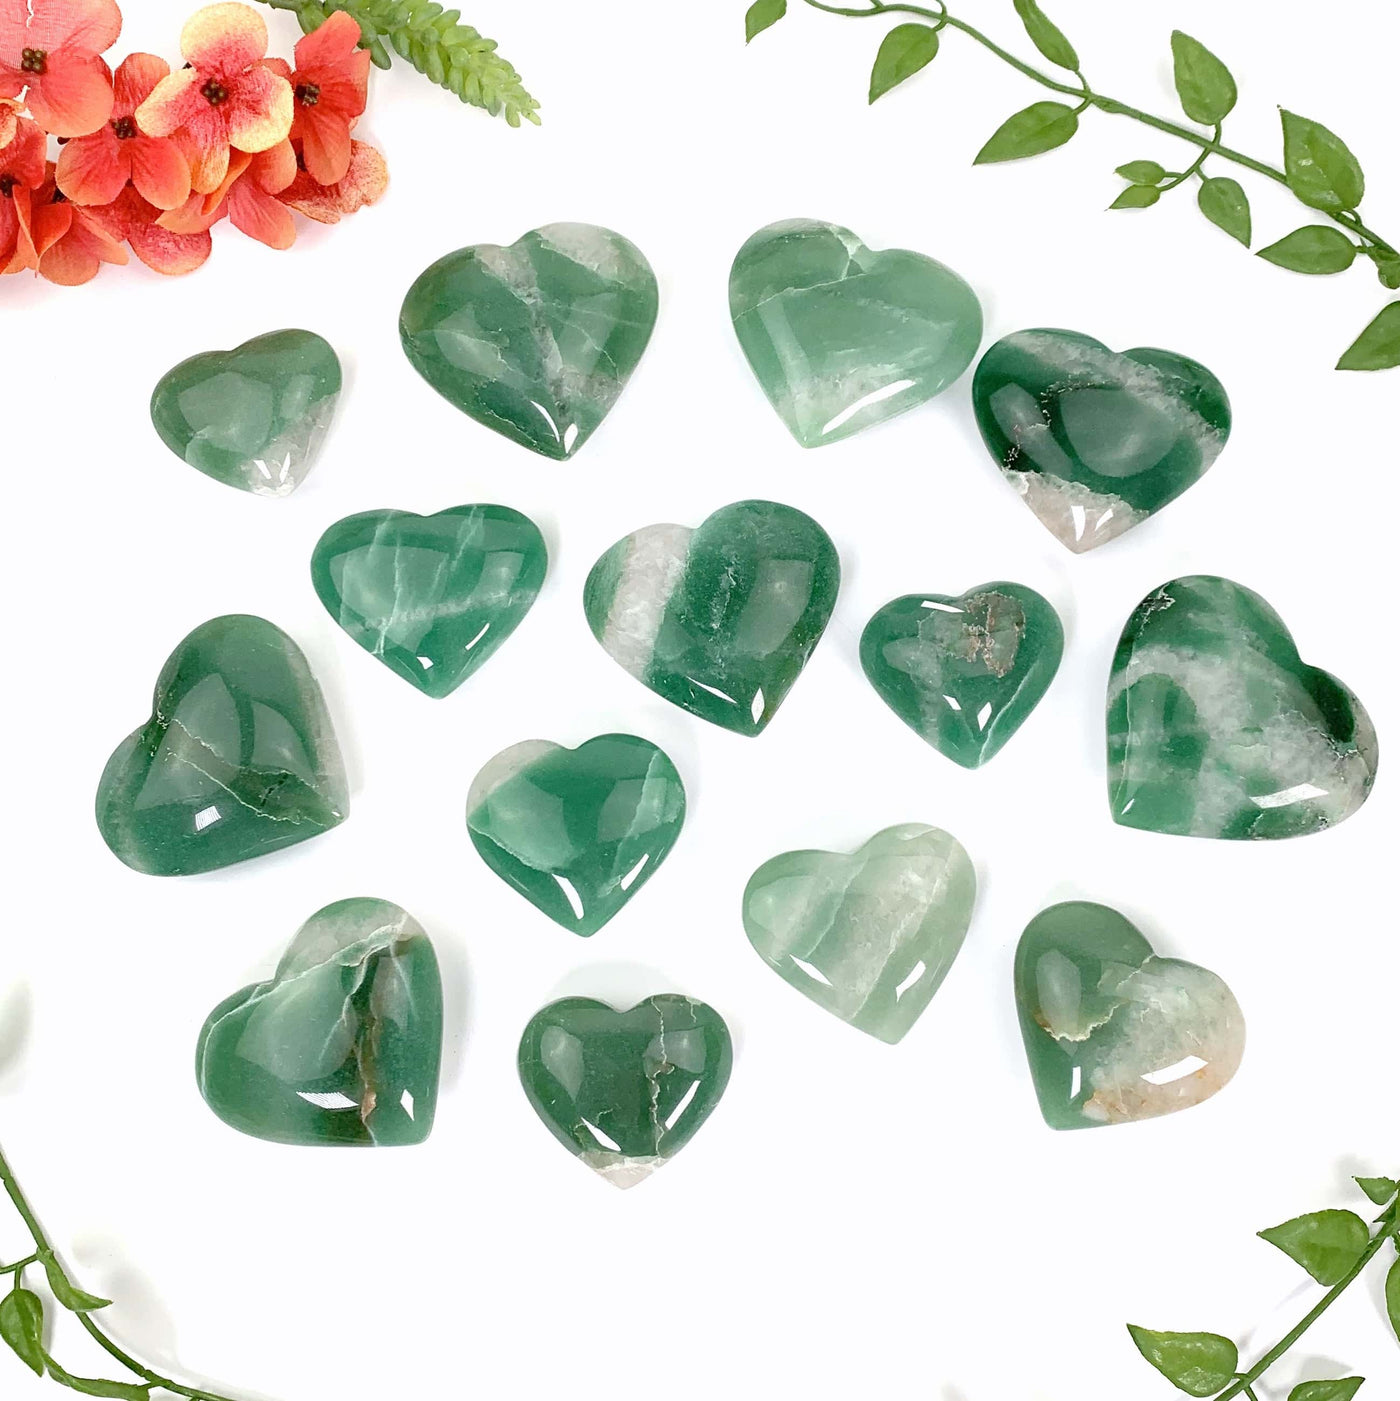 14 green quartz heart laid out on a white background